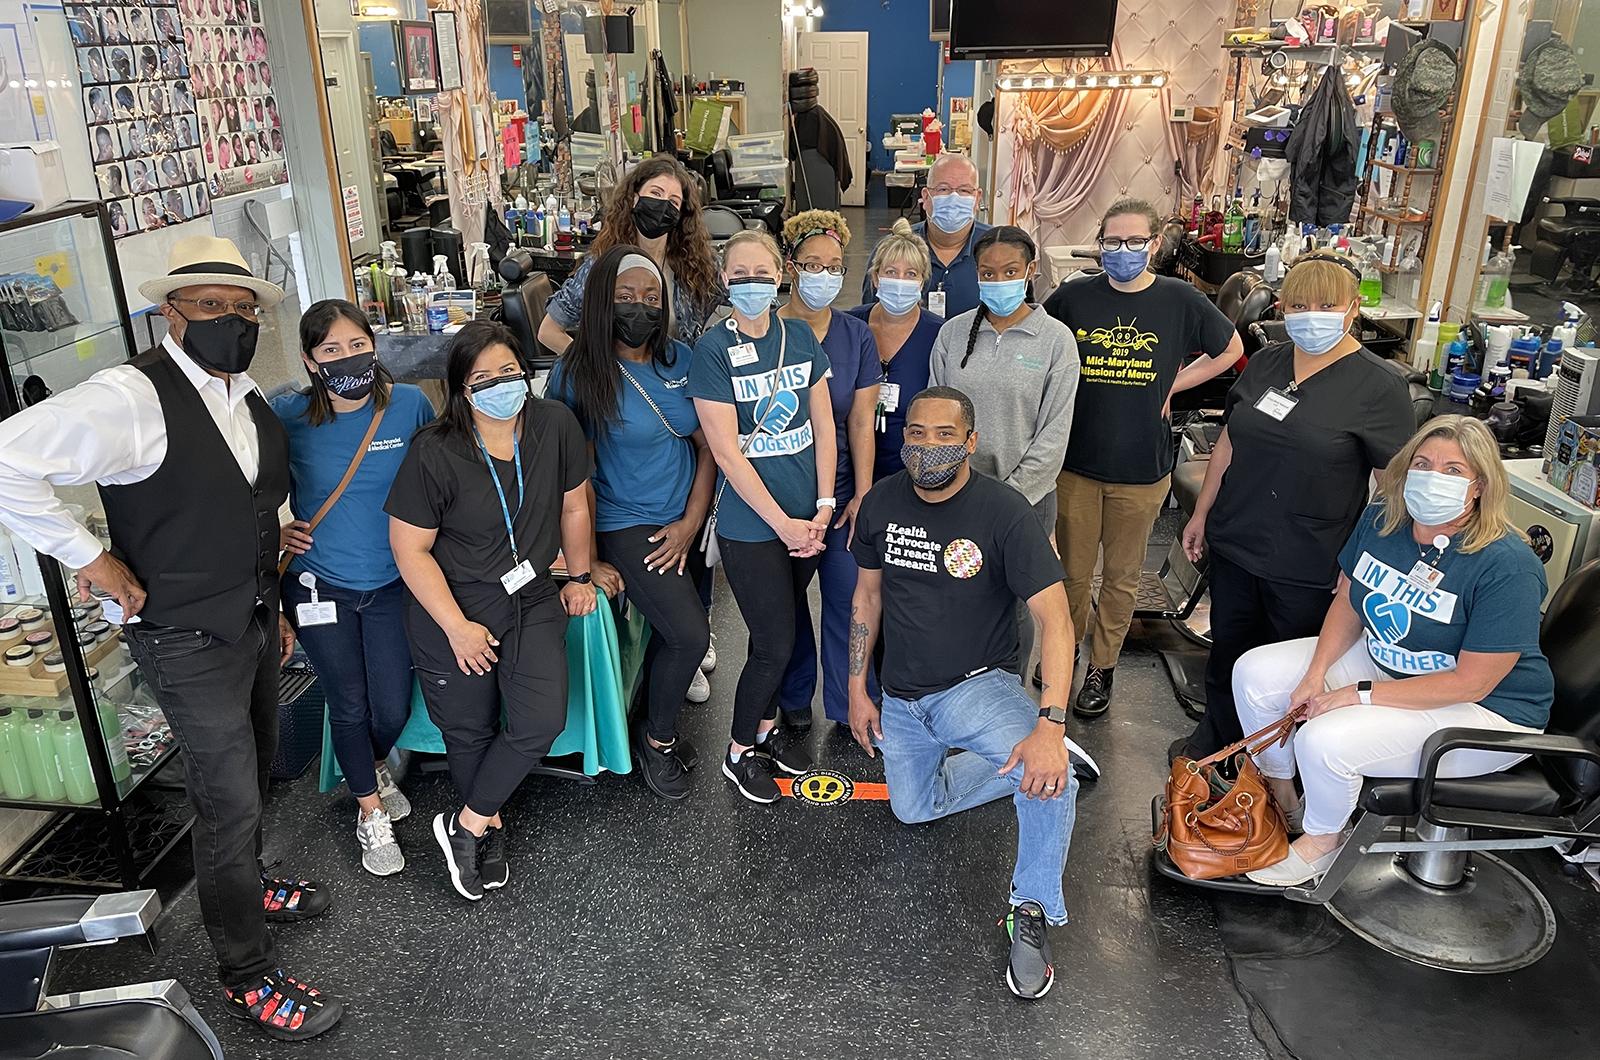 Dr. Stephen Thomas with students, barbers and nurses at the Shop Spa barbershop who are working the vaccine clinic, all are wearing masks